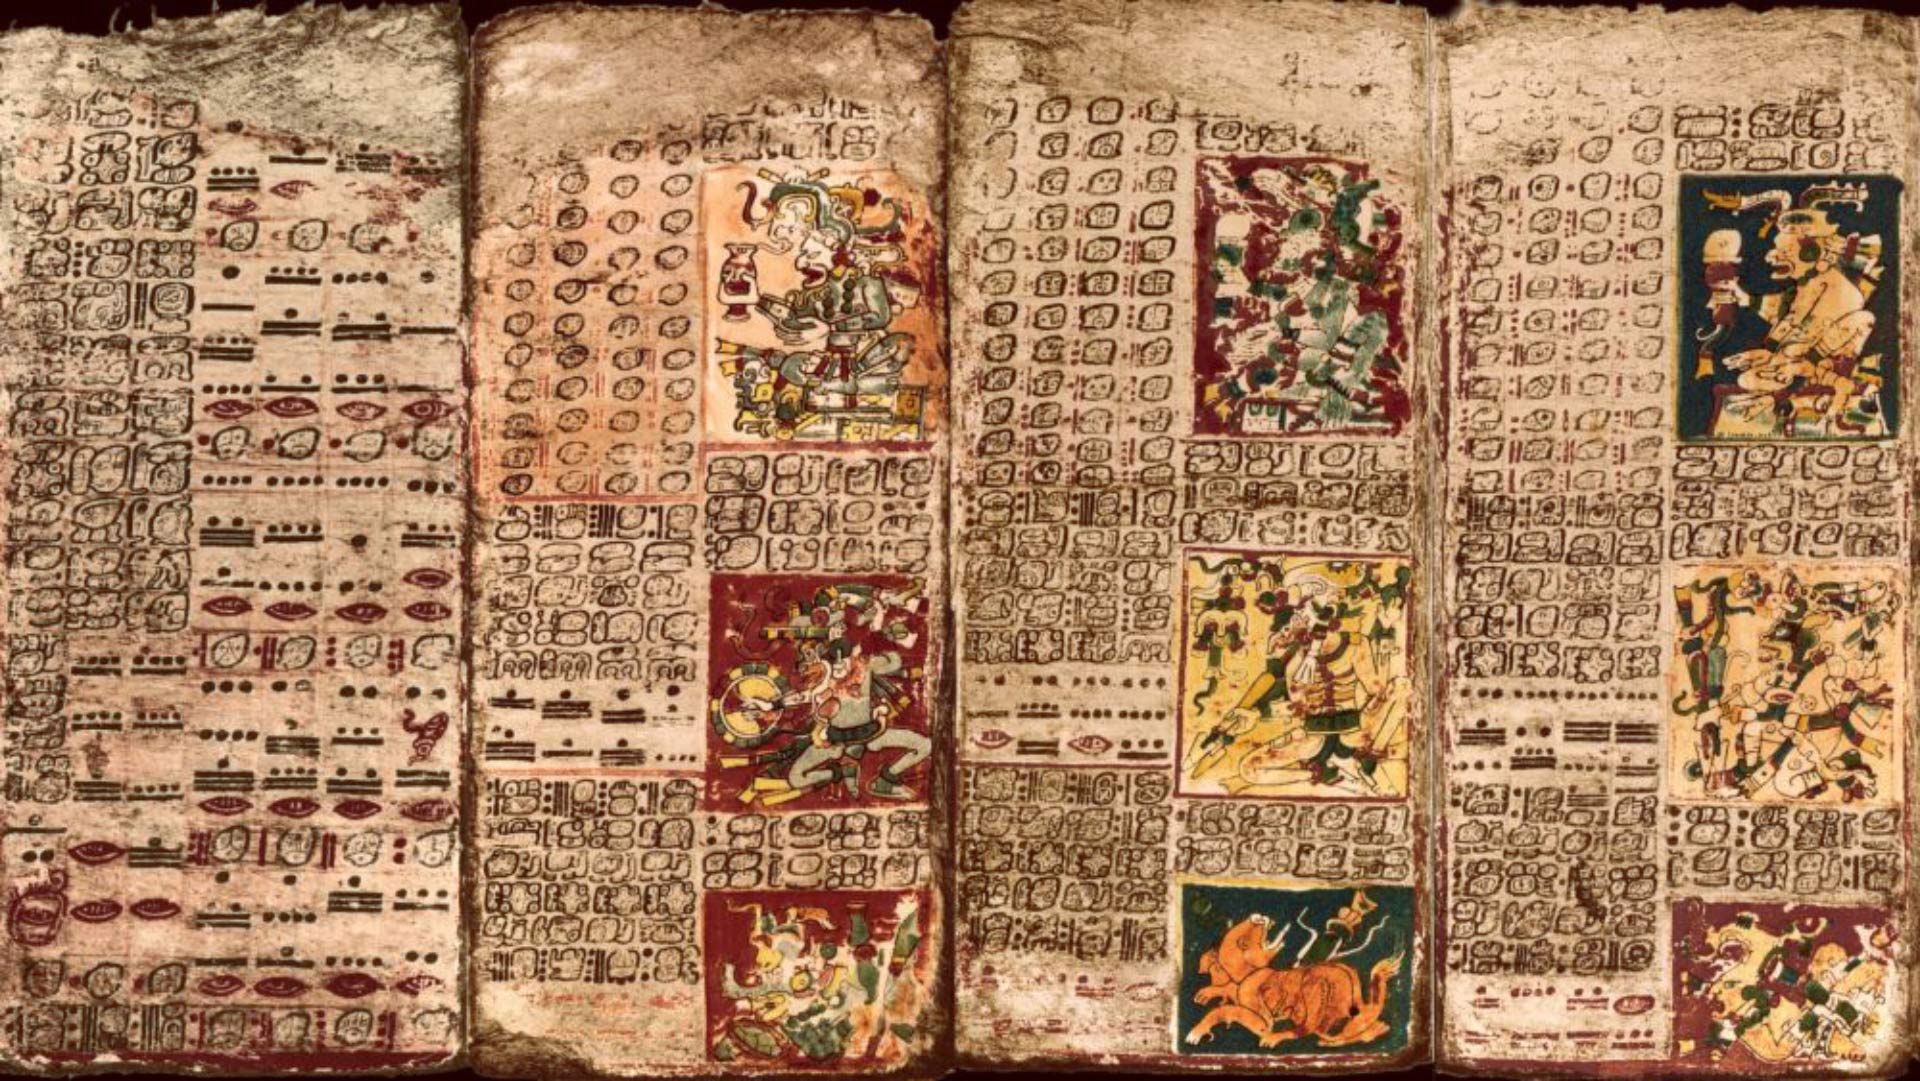 Dresden Codex Venus Table Reveals Ancient Mayans Made Major Discovery in Astronomy, Math | Archaeology, Astronomy, Mathematics | Sci-News.com